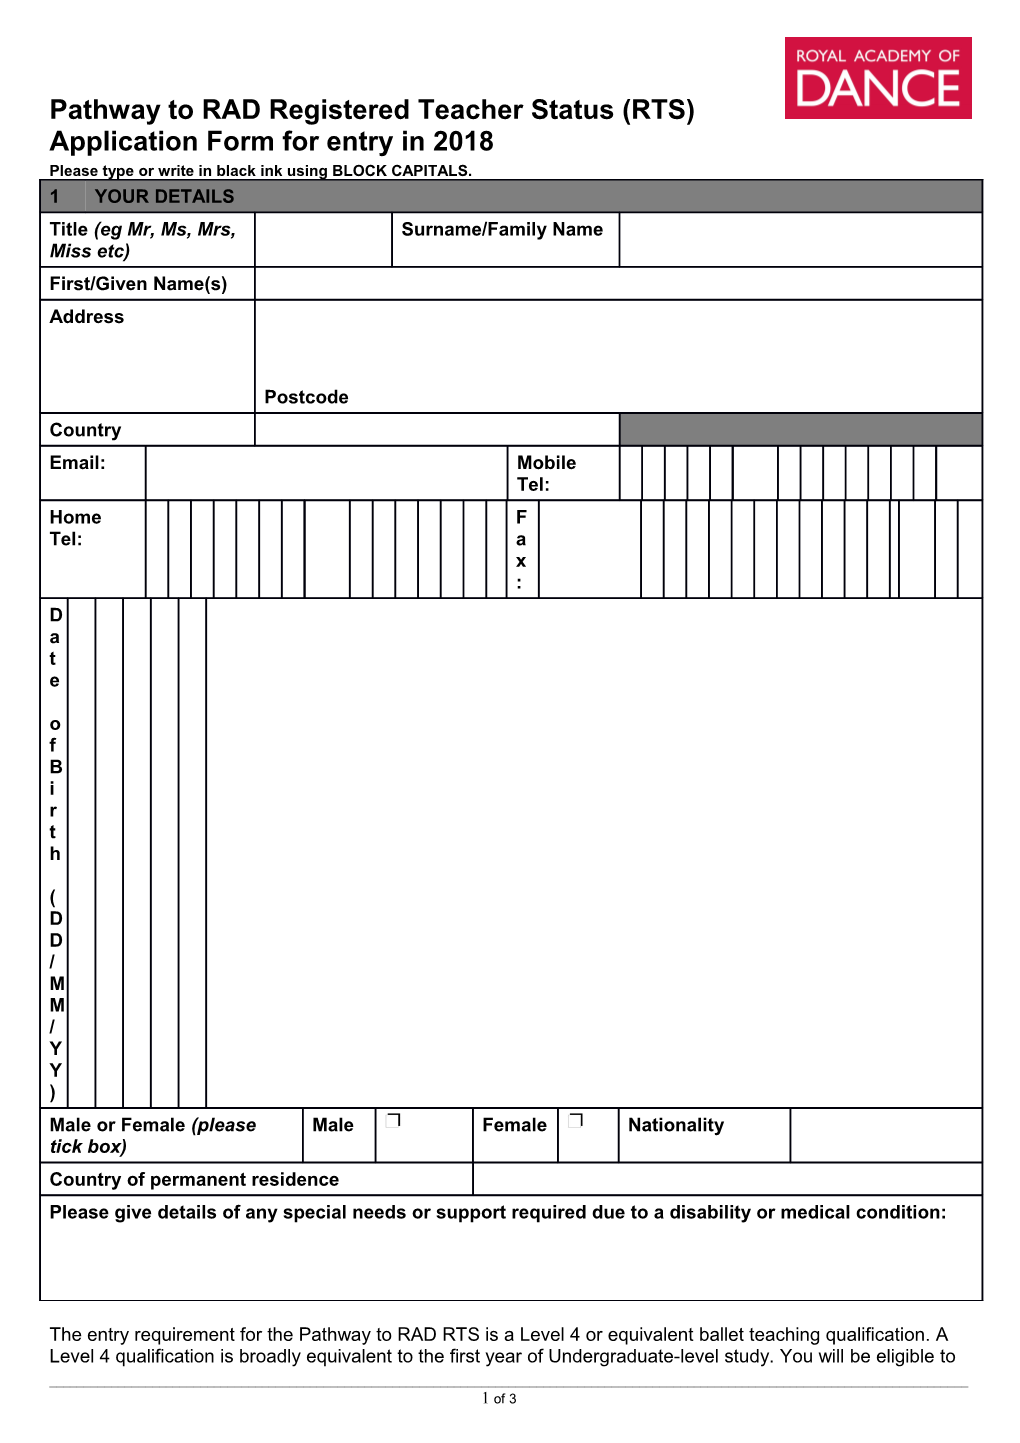 Application Form for Entry in 2003